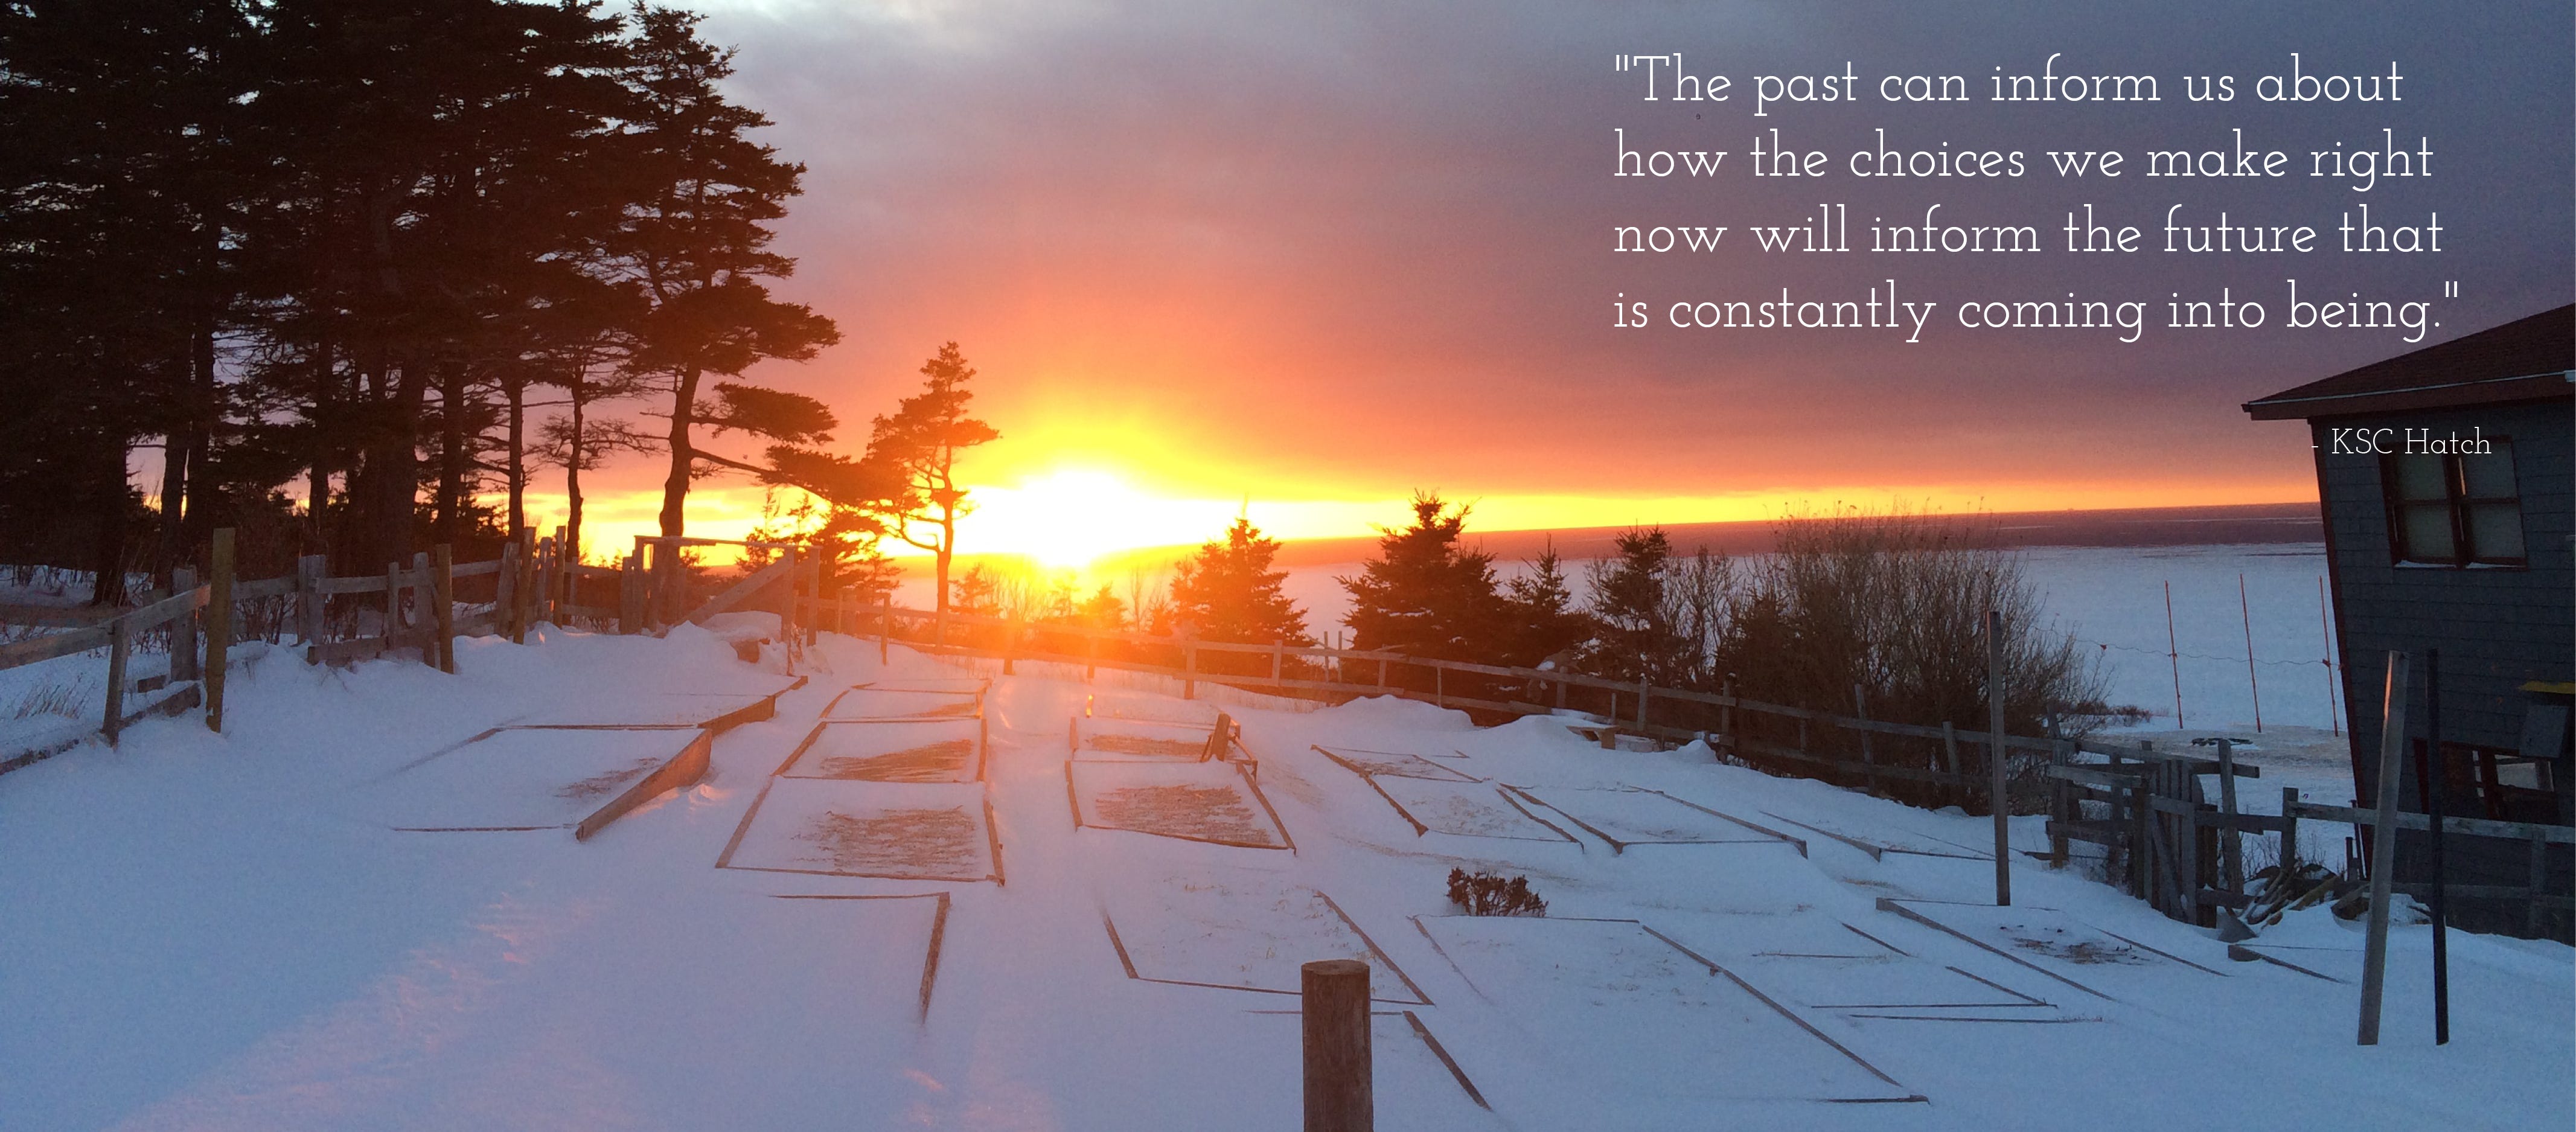 Photo of a setting sun on the horizon of a snowy landscape. Snow-covered garden beds lay on the ground, a cluster of shadowed trees to the left, the glowing orange/yellow of the sun in the middle of the image. To the right, in the upper corner, is text that reads: The past can inform us about how the choices we make right now will inform the future that is constantly coming into being. 